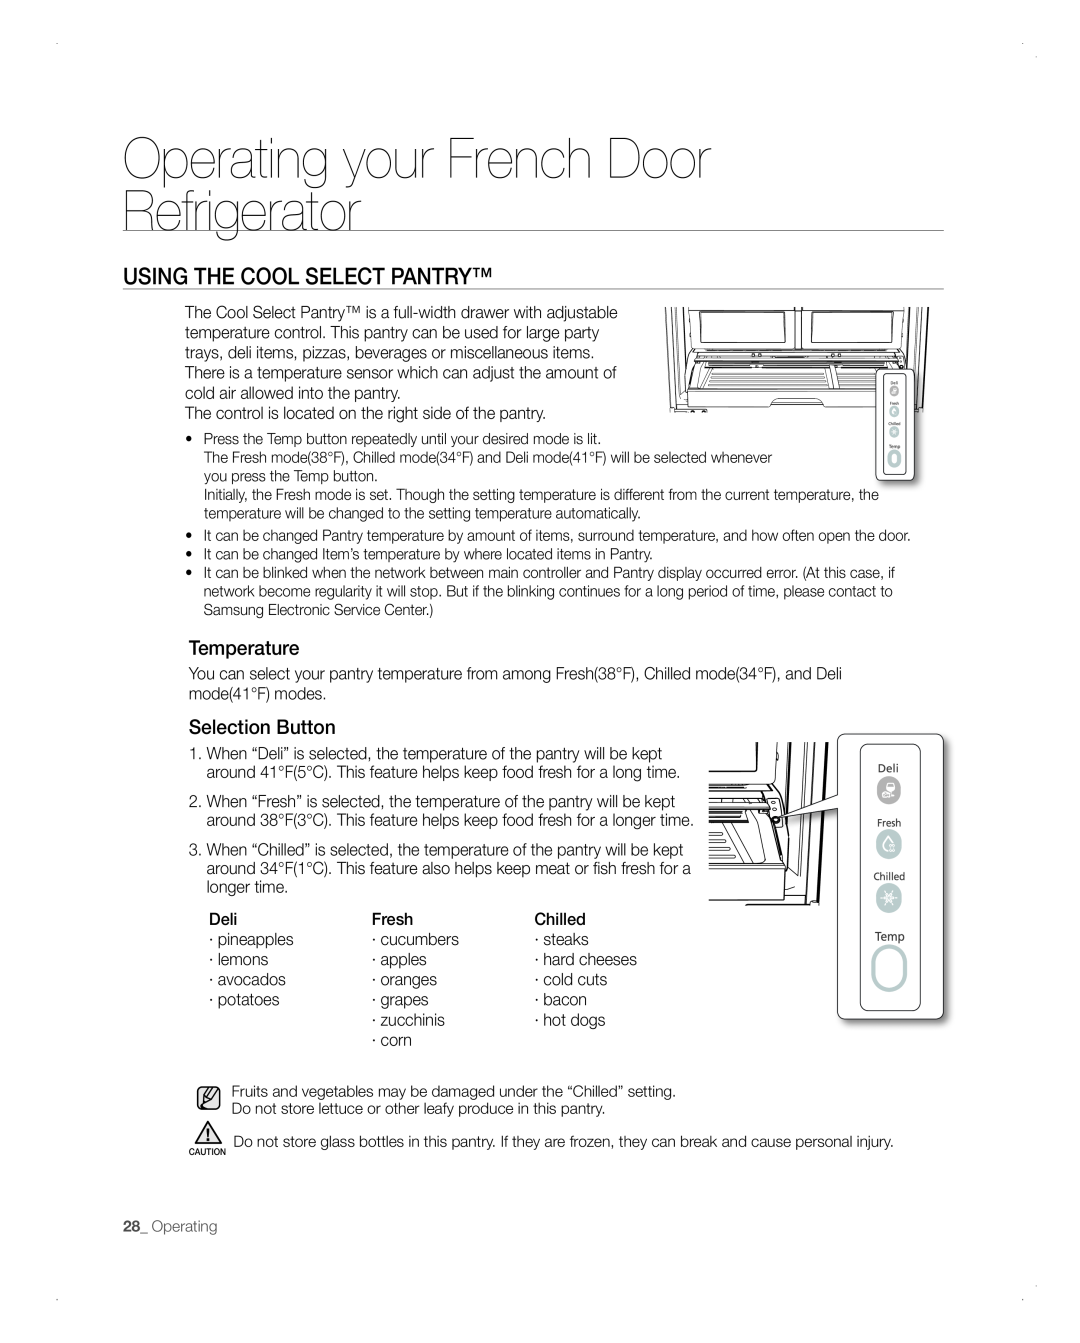 Samsung RFG298AARS Using The Cool Select Pantry, Operating your French Door Refrigerator, Temperature, Selection Button 